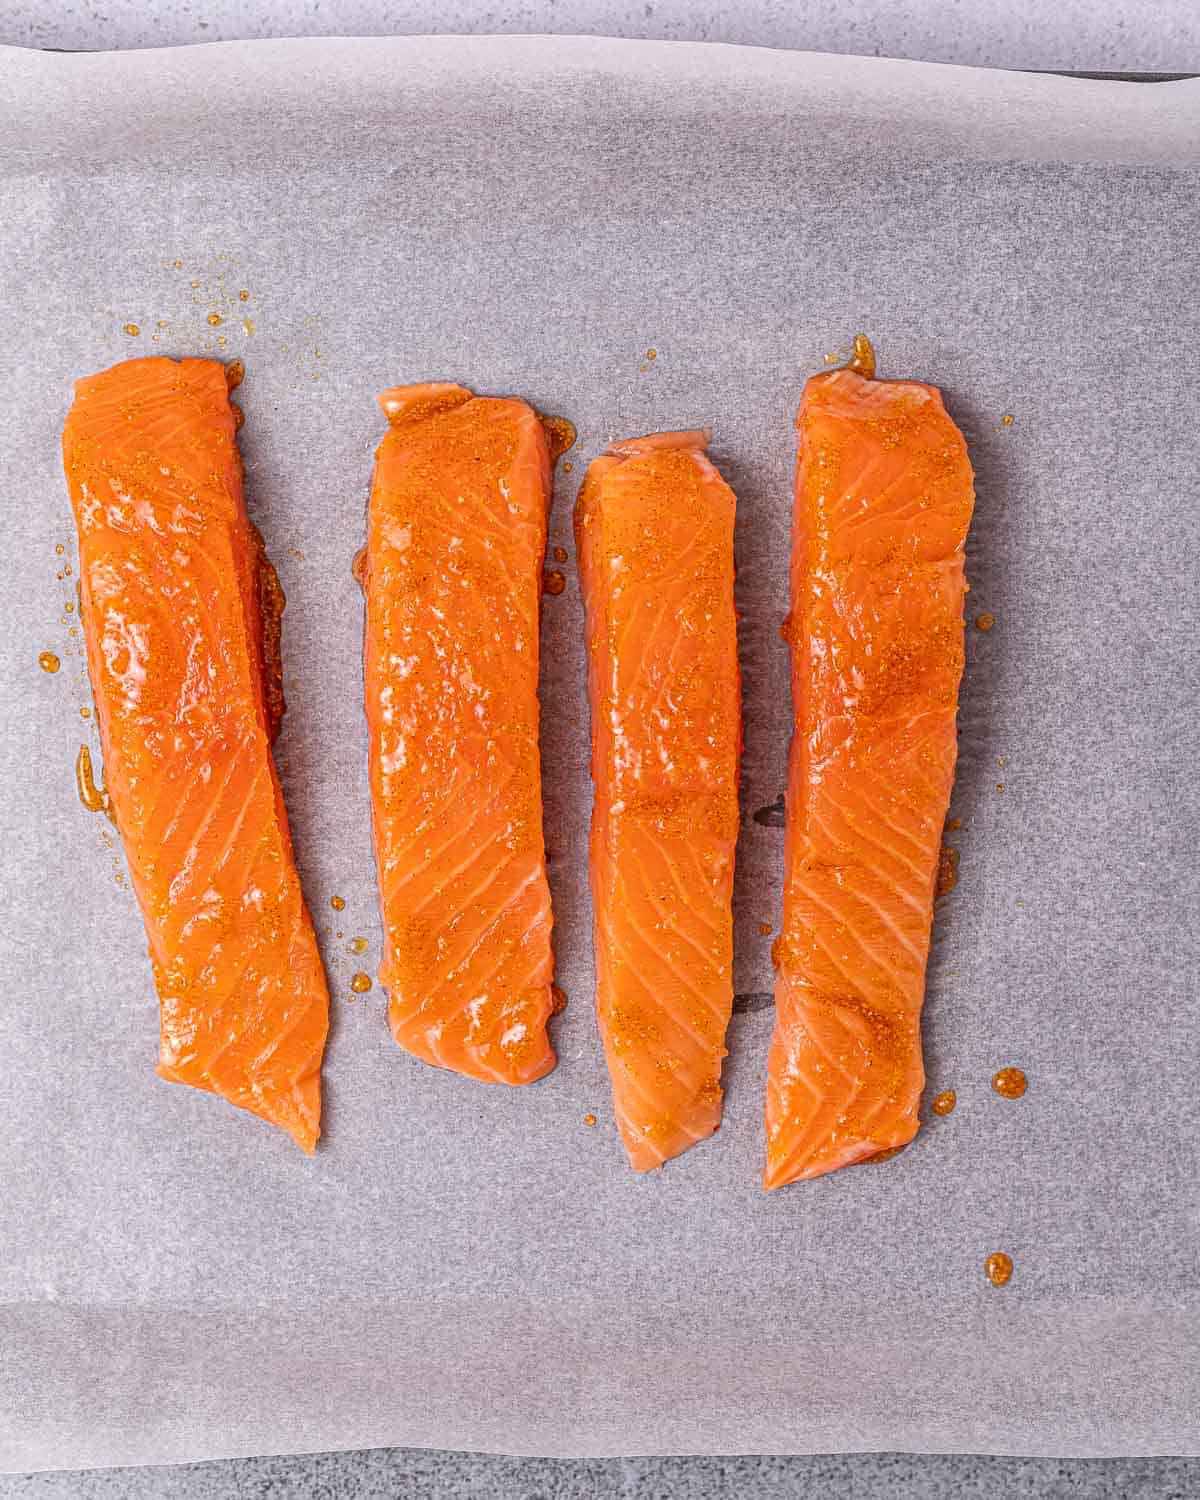 Coating salmon filets in spices.